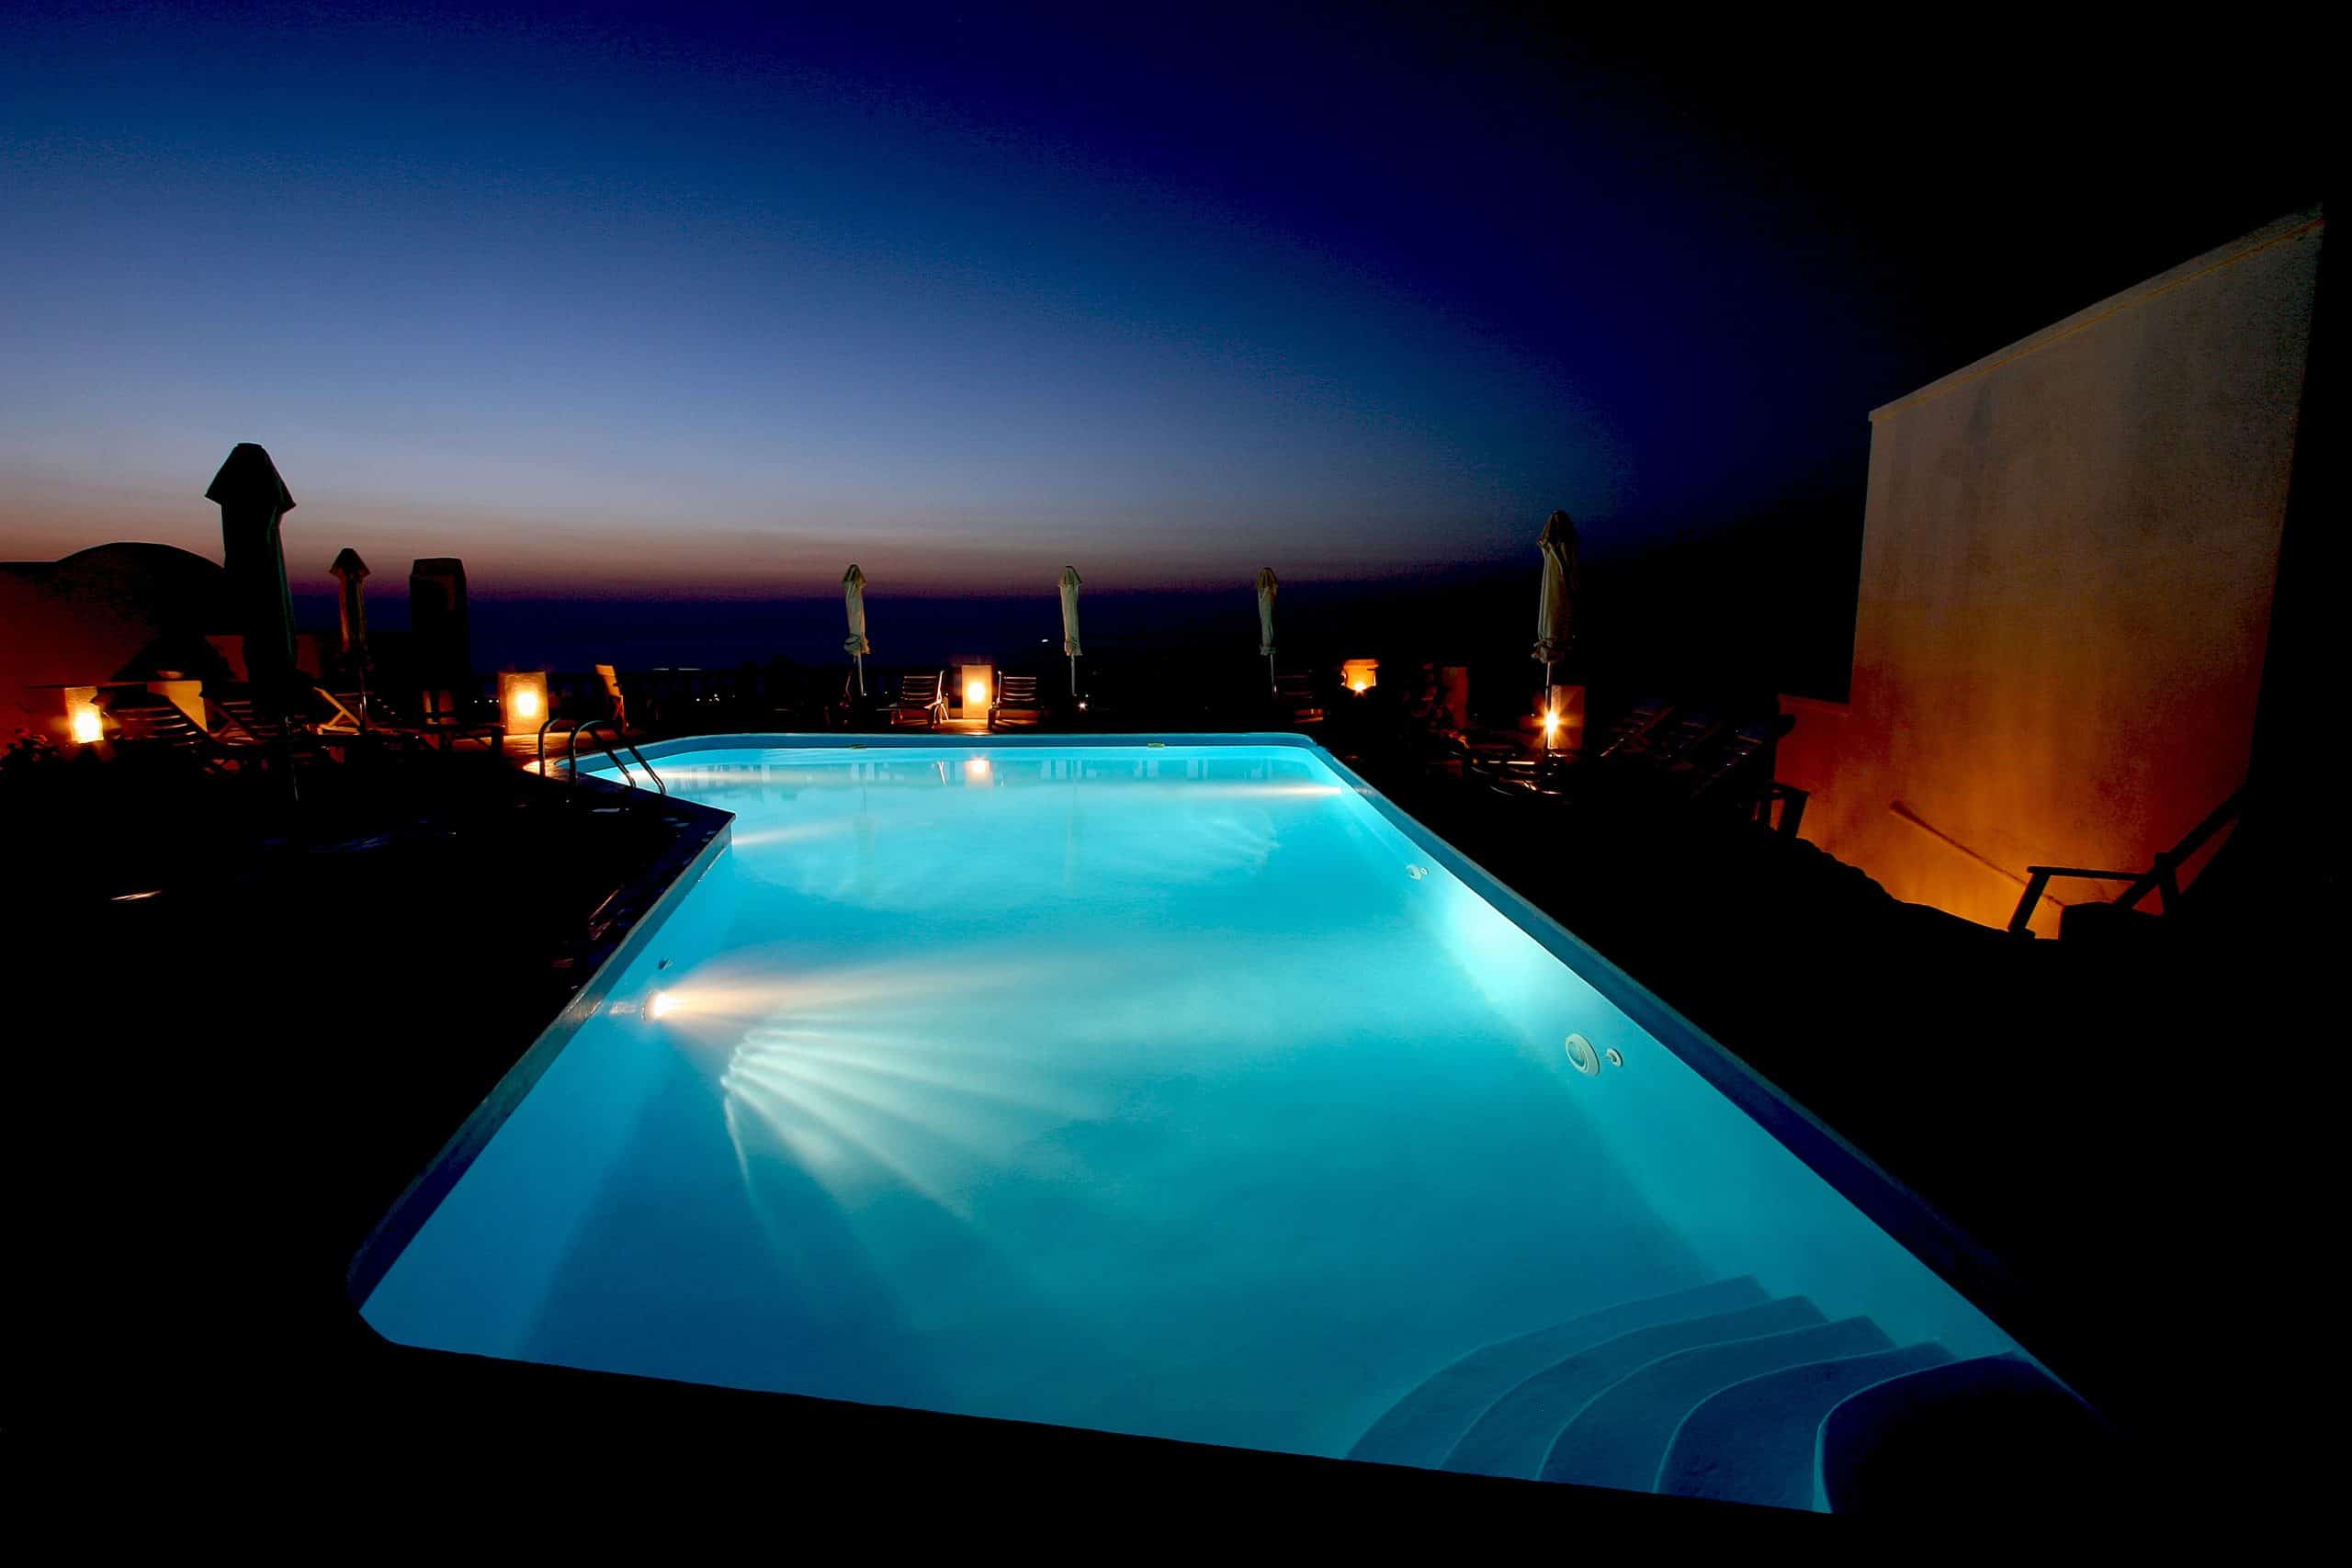 Swimming pool lit at night with faint sunset and ambiance lights.